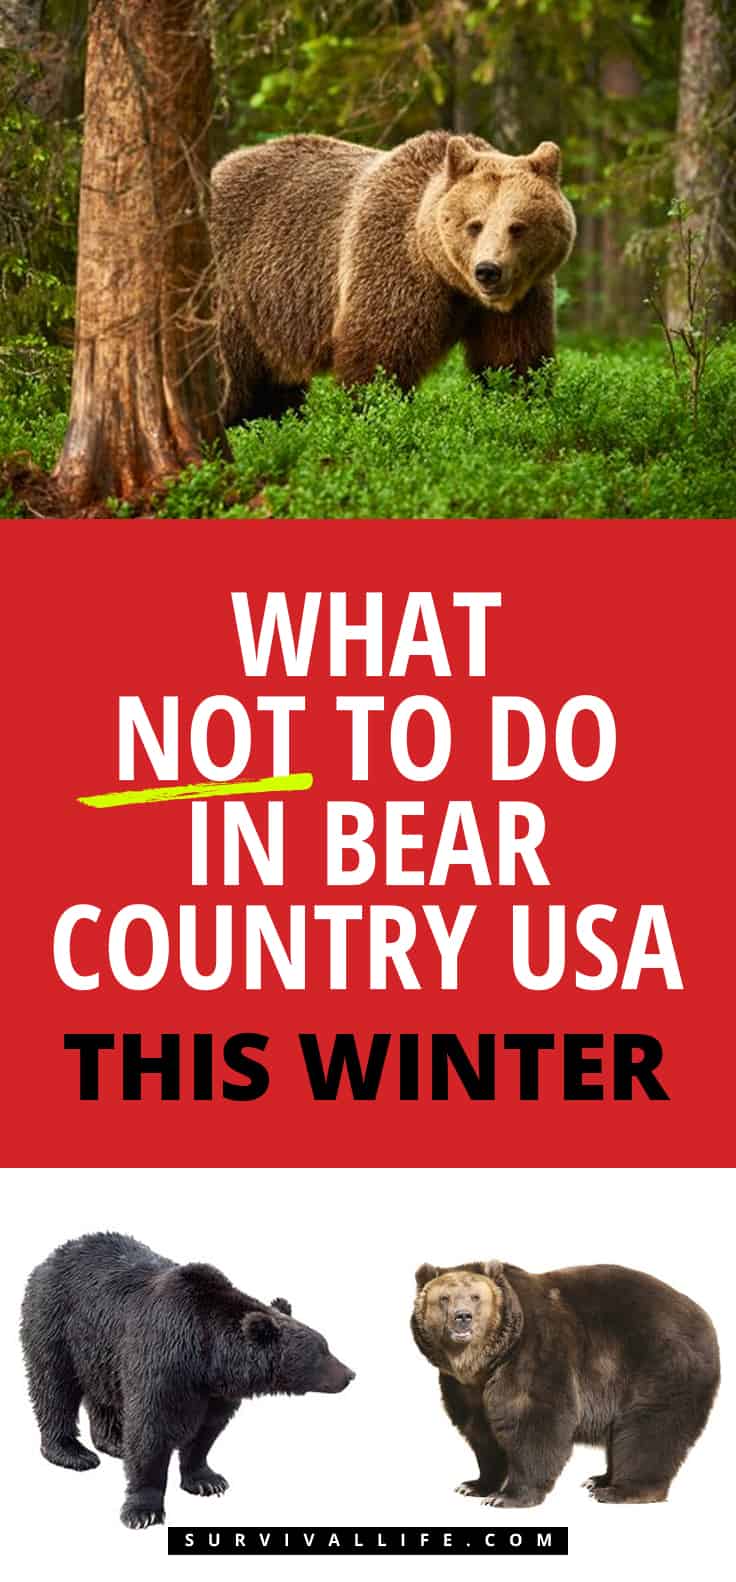 Bears | What NOT To Do In Bear Country USA This Winter | friendly grizzly bear